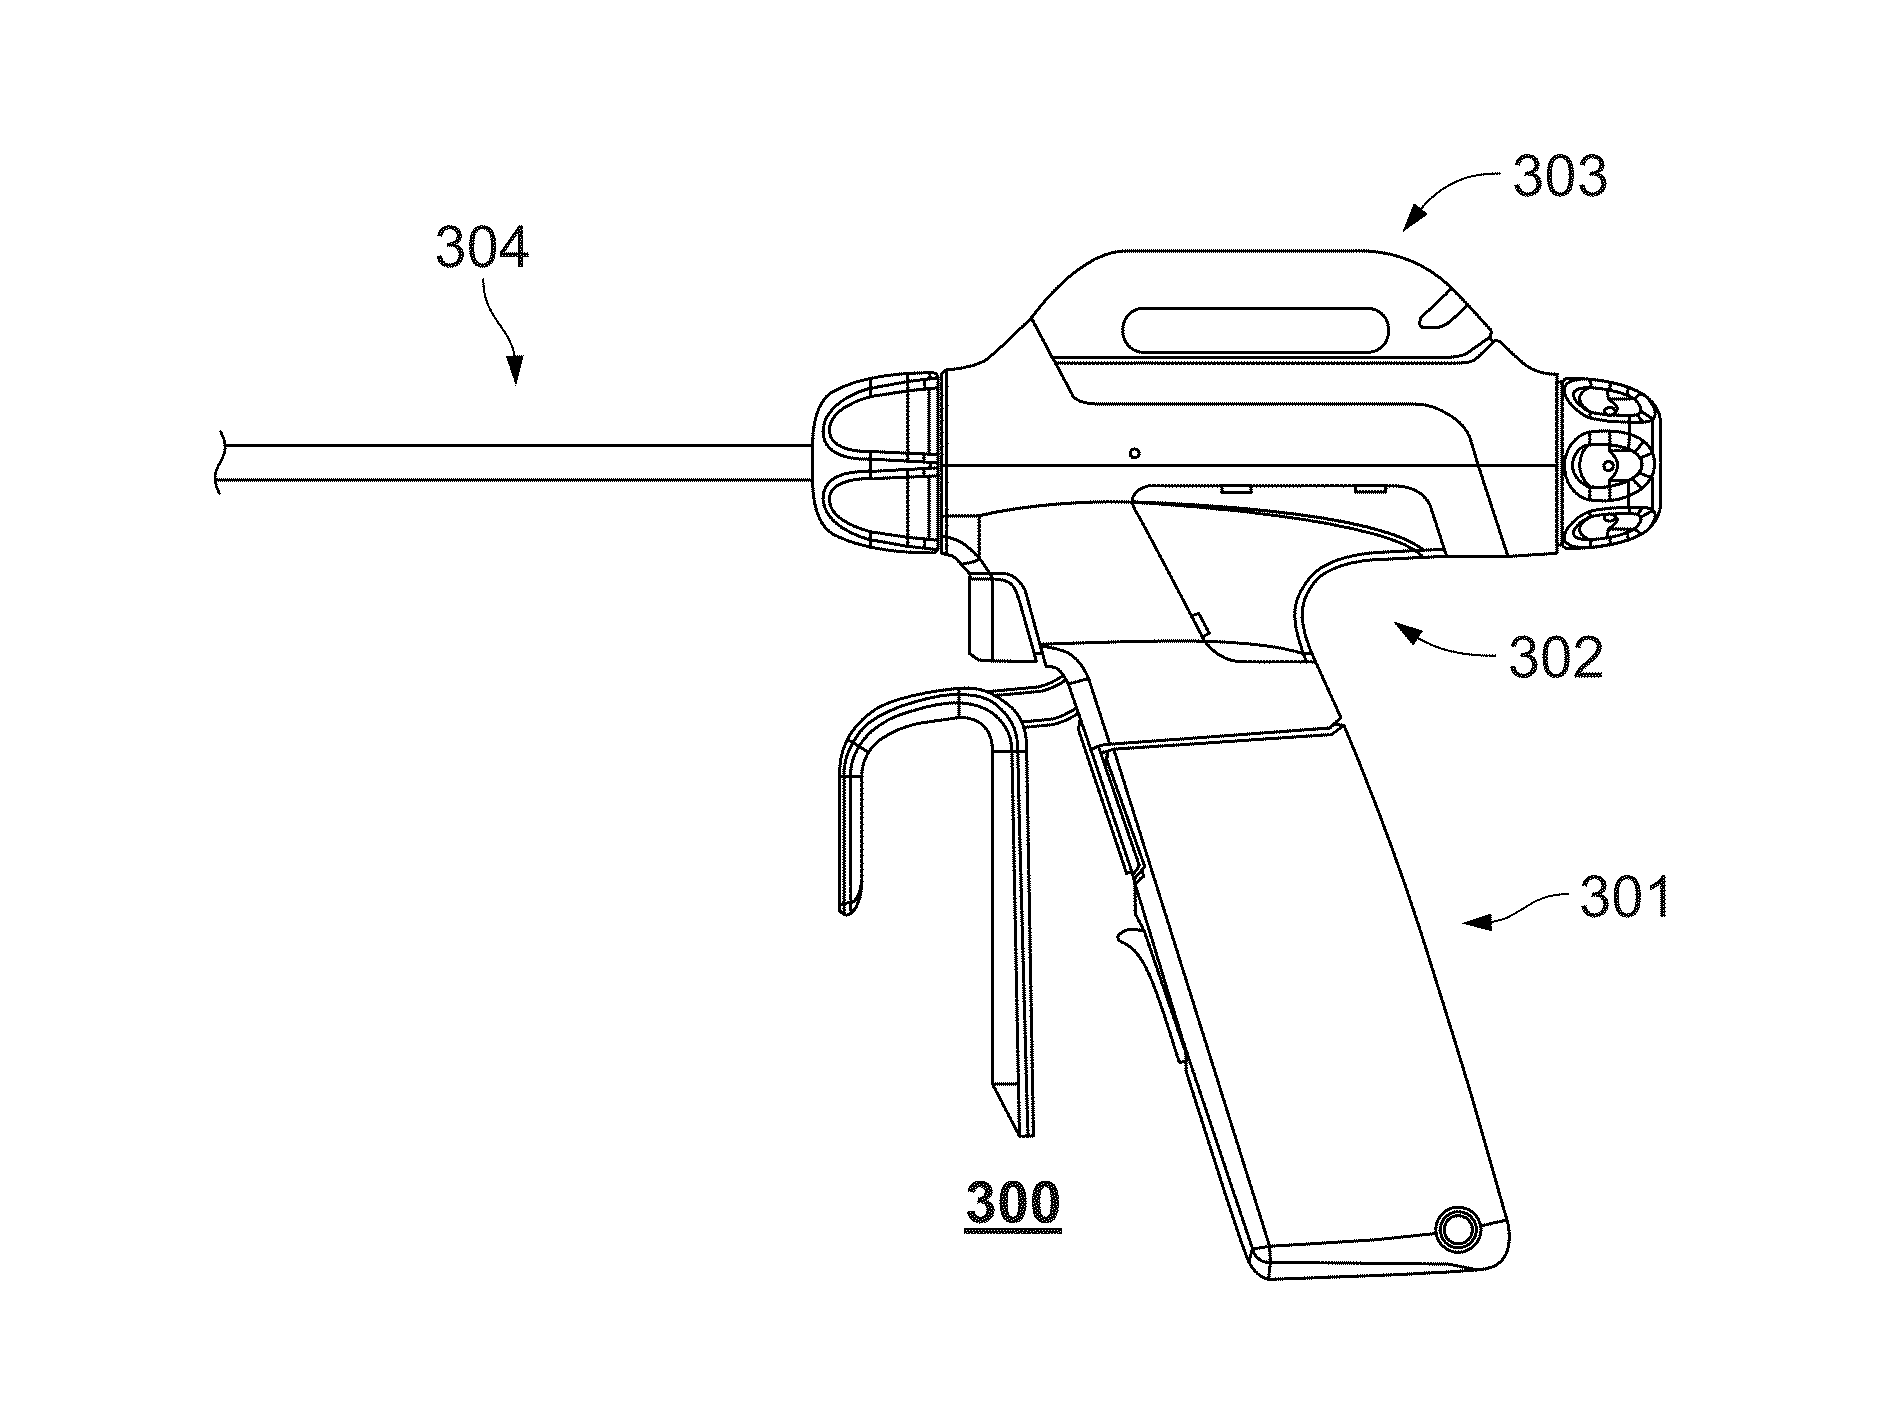 Battery-Powered Hand-Held Ultrasonic Surgical Cautery Cutting Device